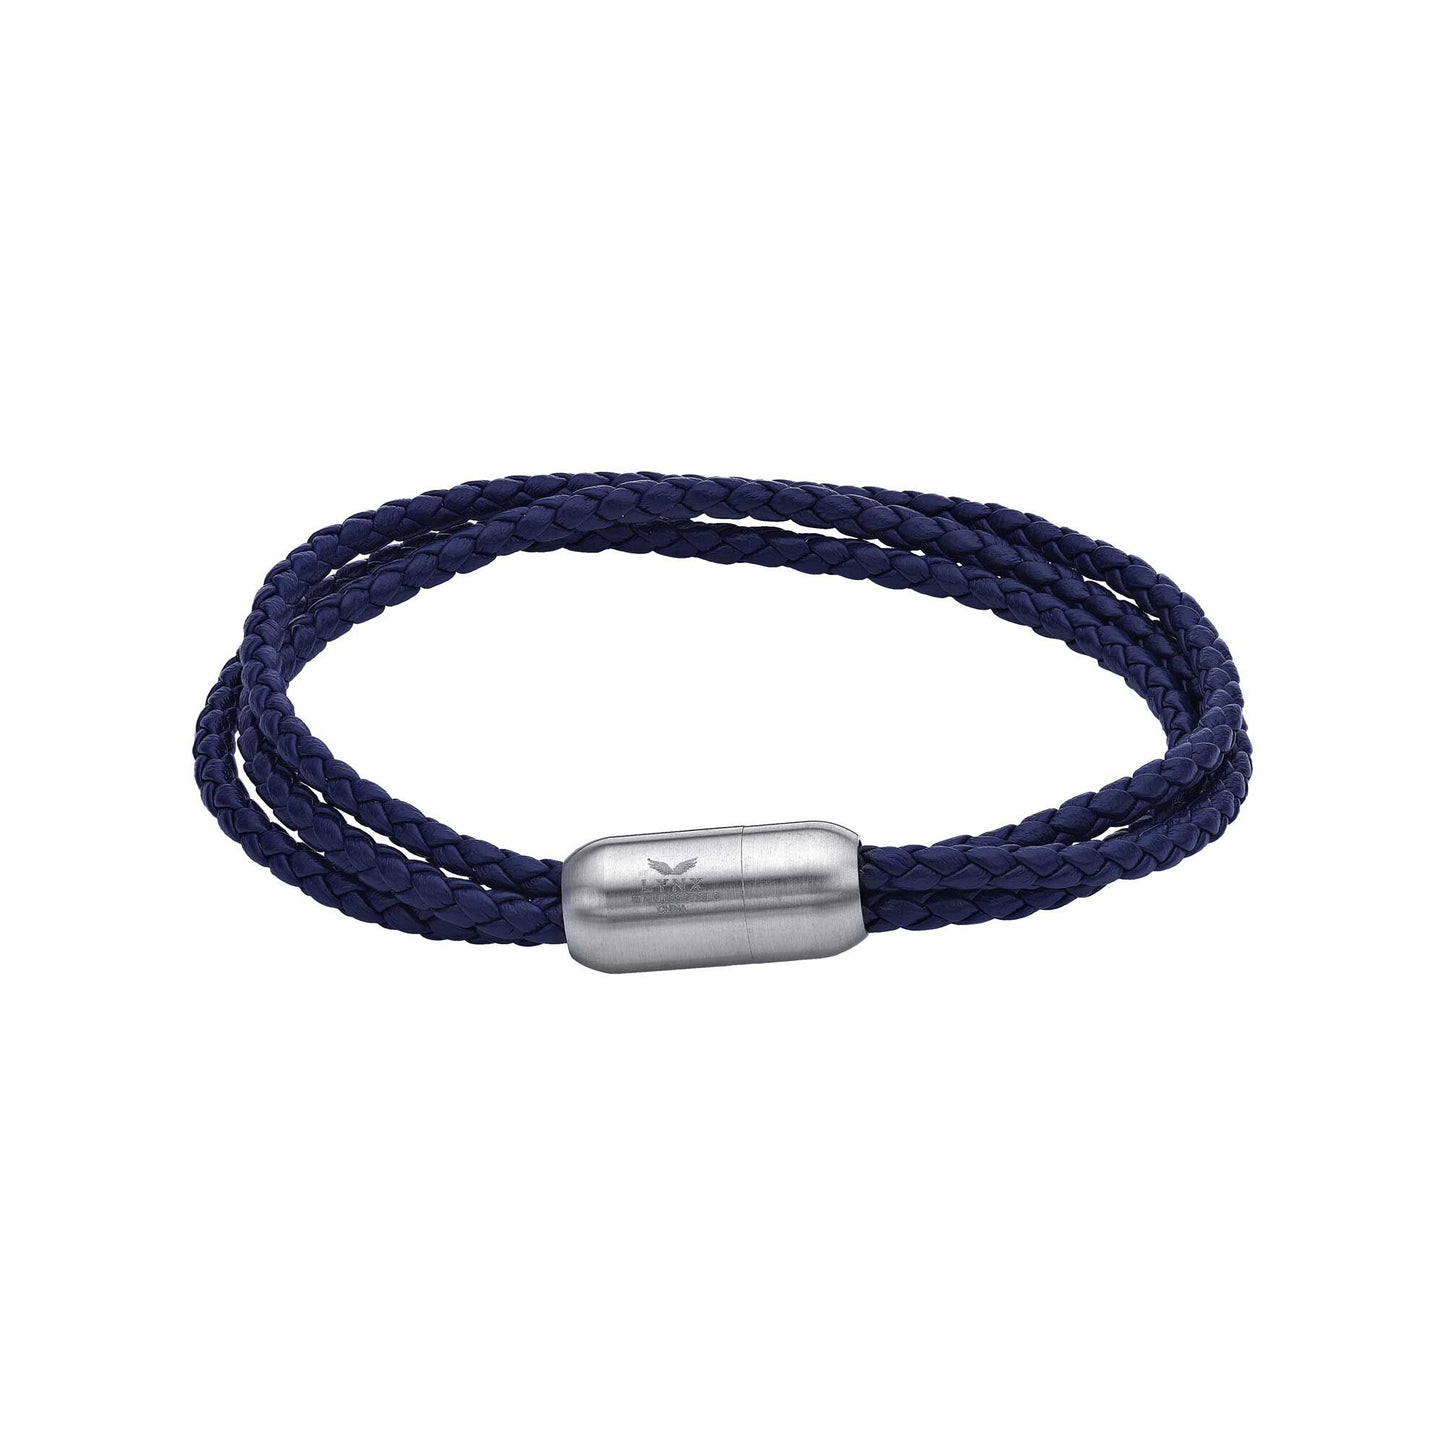 Brady Stainless Steel and Blue Leather Braided Bracelet